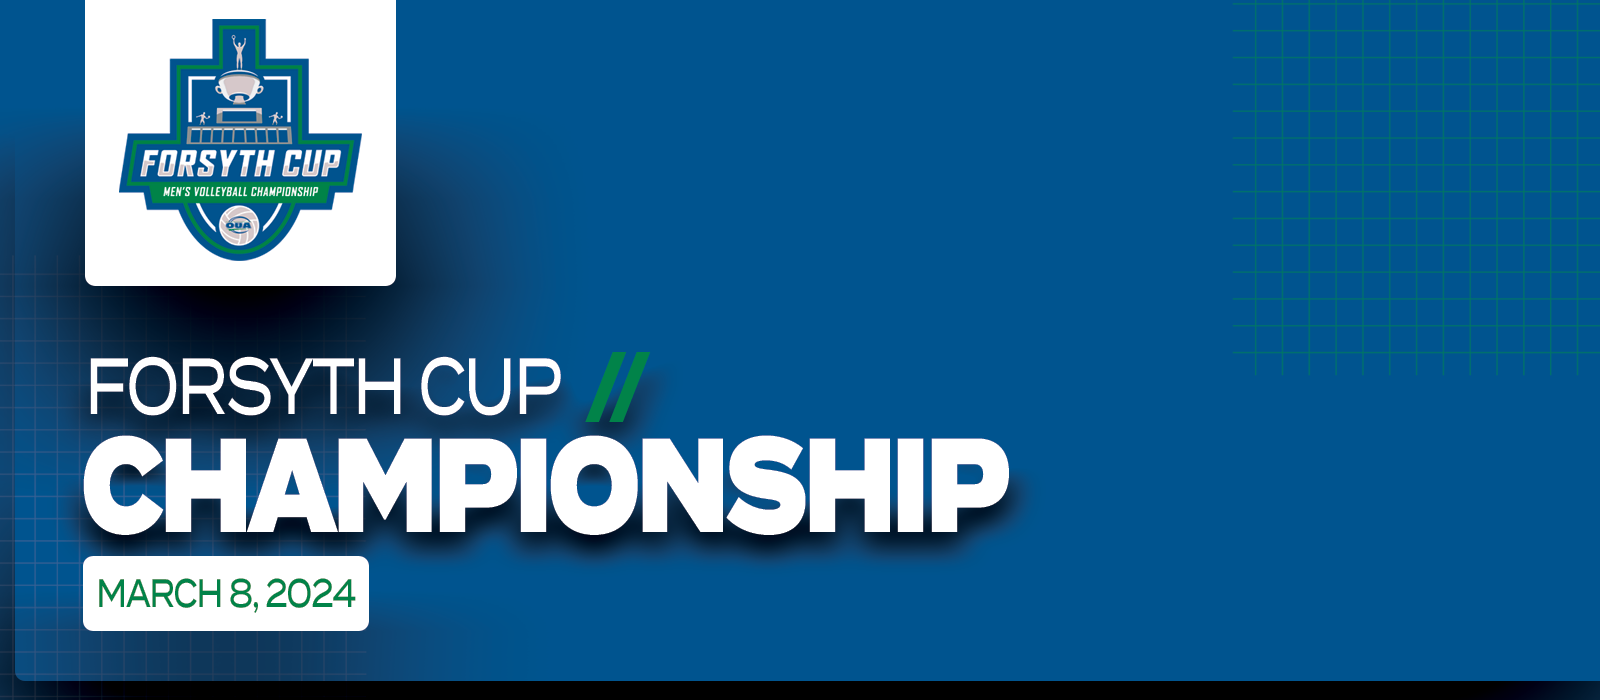 Predominantly blue graphic with large white text on the left side that reads Forsyth Cup Championship, March 8, 2024’ beneath the OUA Forsyth Cup Men’s Volleyball Championship logo